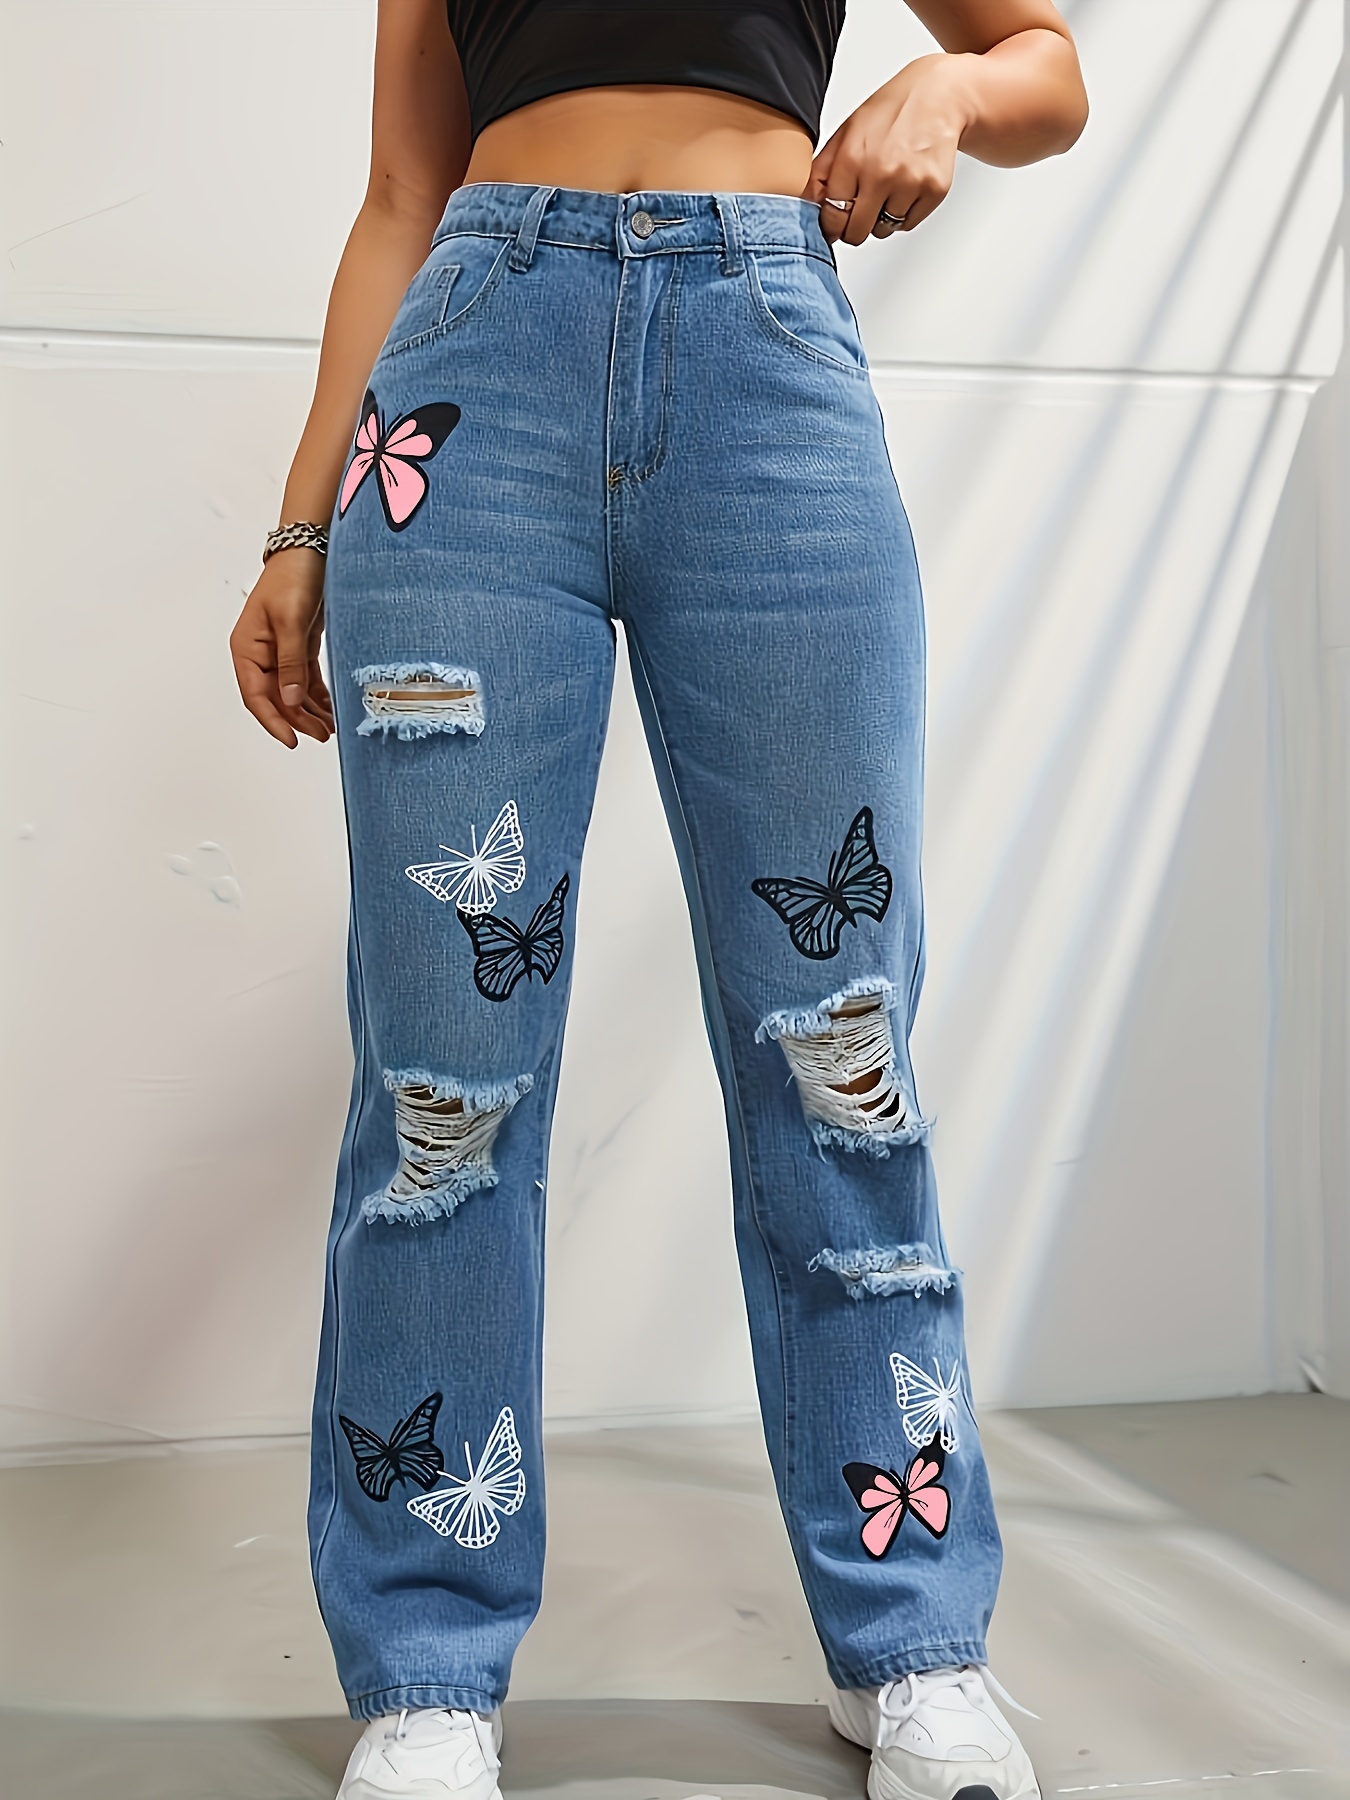 Womens Ripped Boyfriend Jeans Teen Girls Trendy Baggy Jeans Cute High Waist  Loose Fit Stretchy Distressed Denim Pants